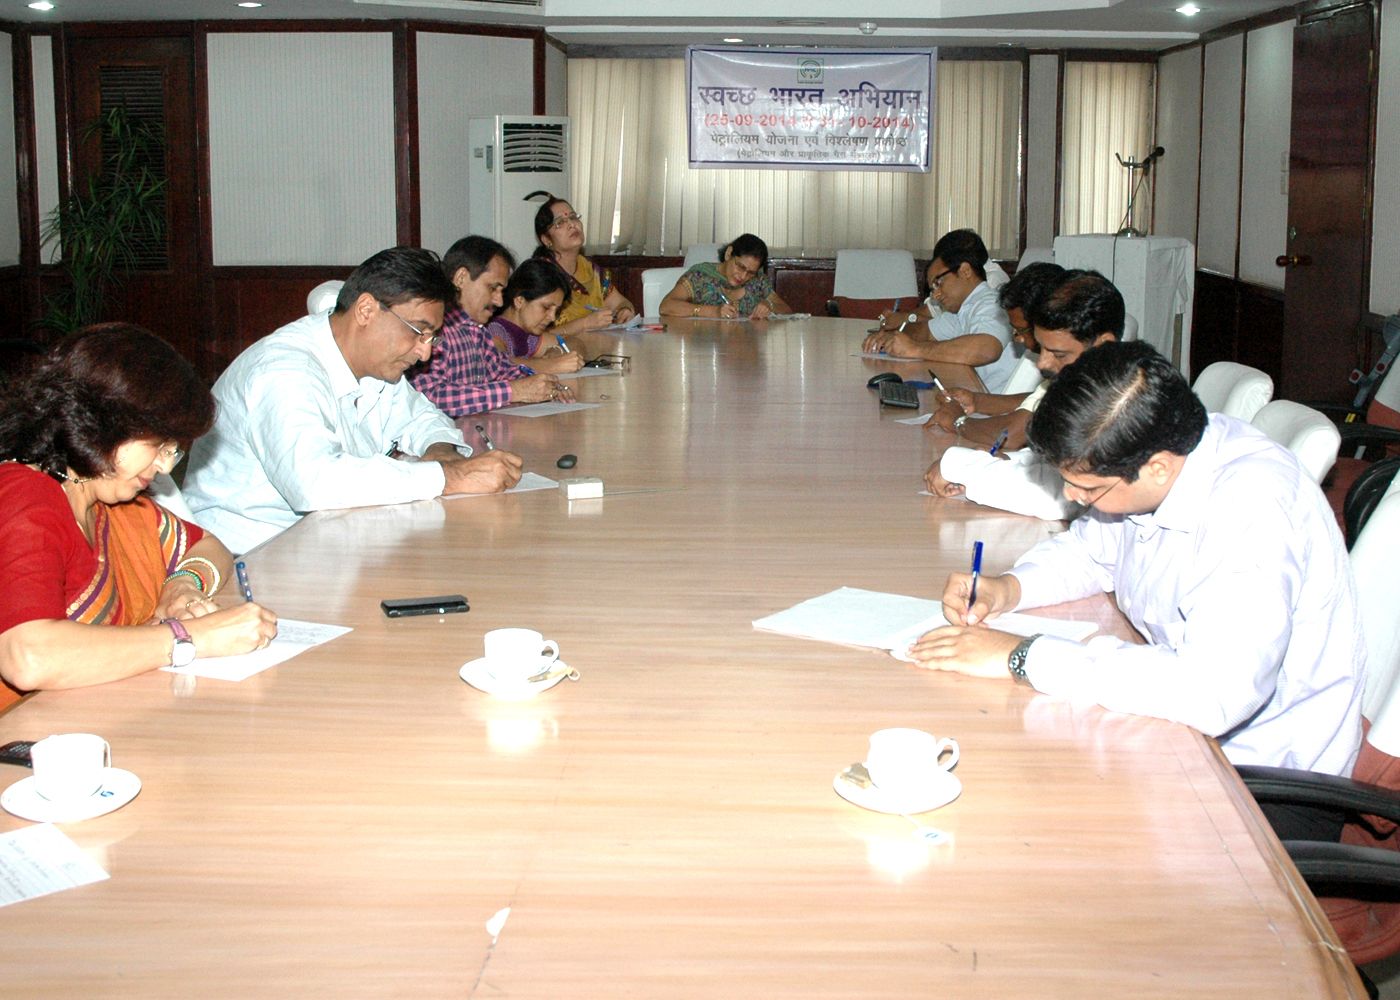 PPAC employees participating in the essay competition Mere Sapno Ka Swachh Bharat in hindi and My Vision of Clean India